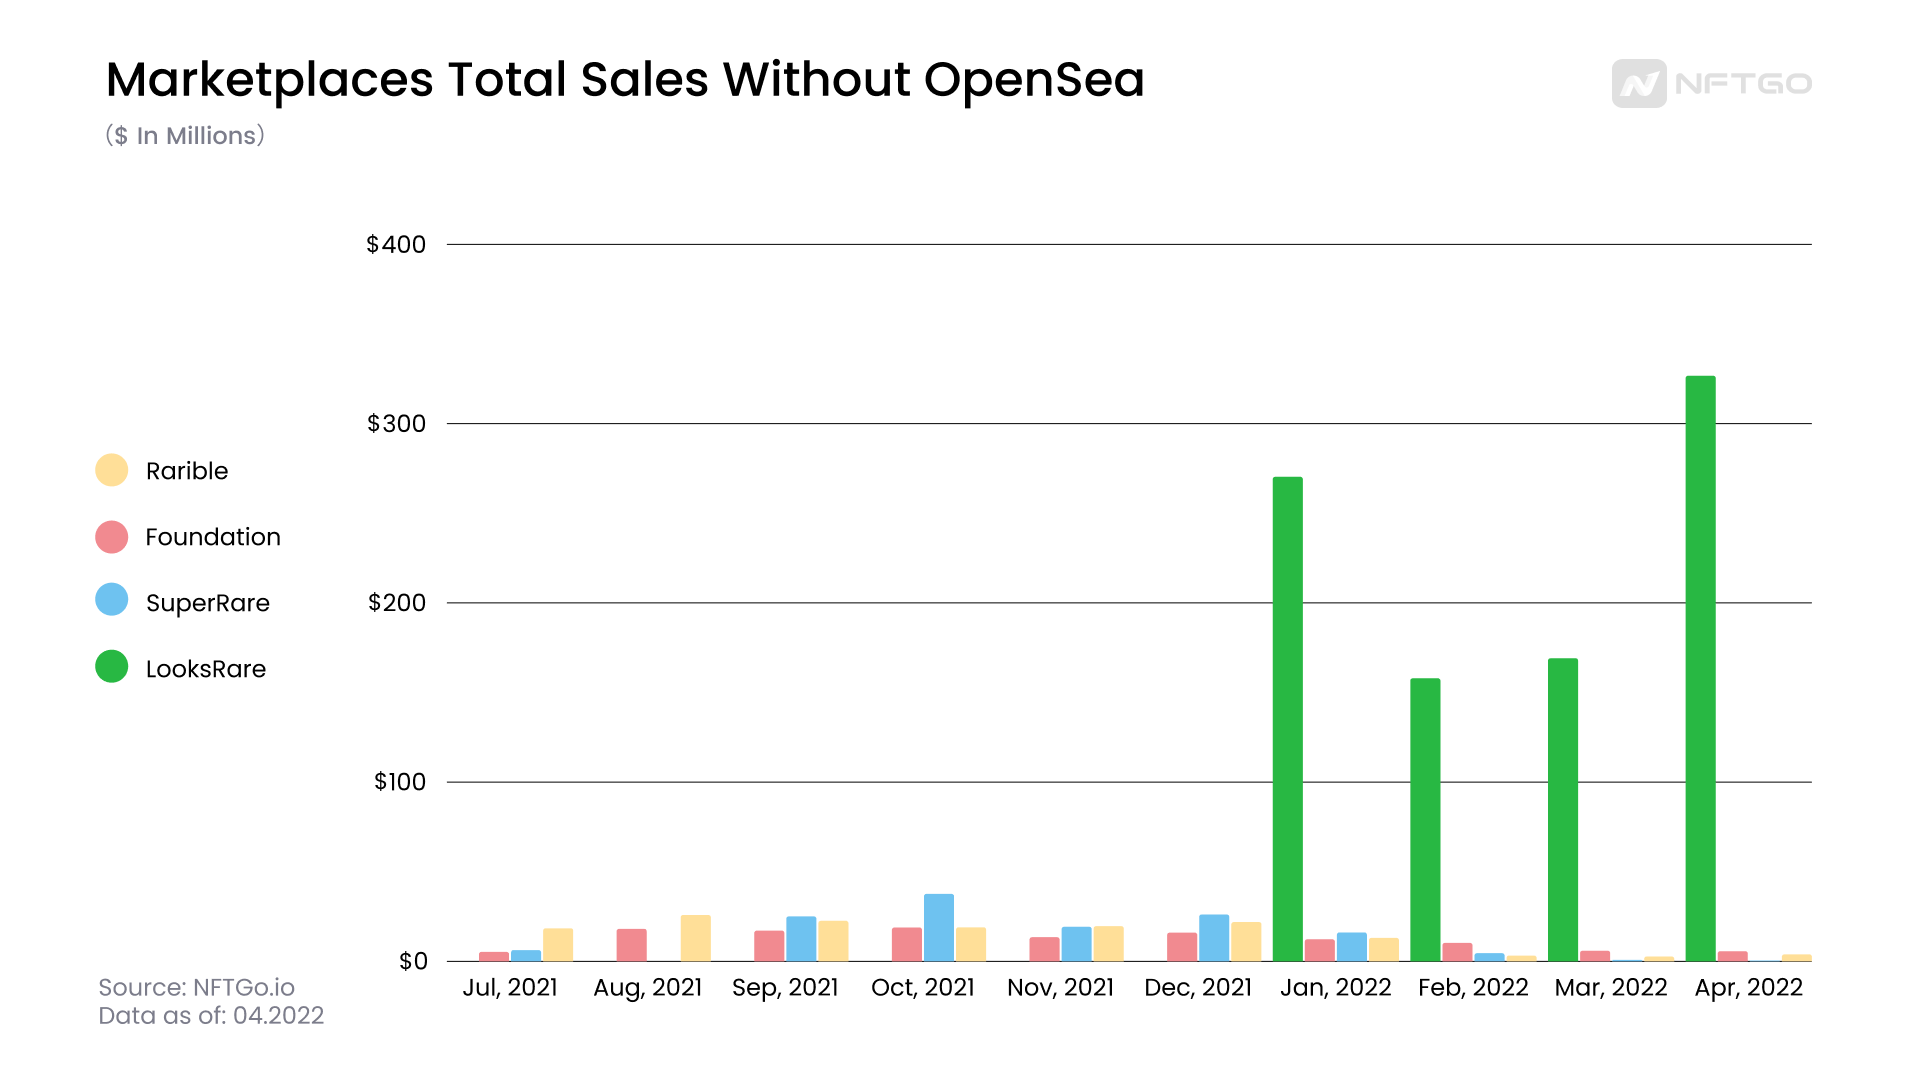 Marketplaces Total Sales Without OpenSea. (Source: NFTGo.io)